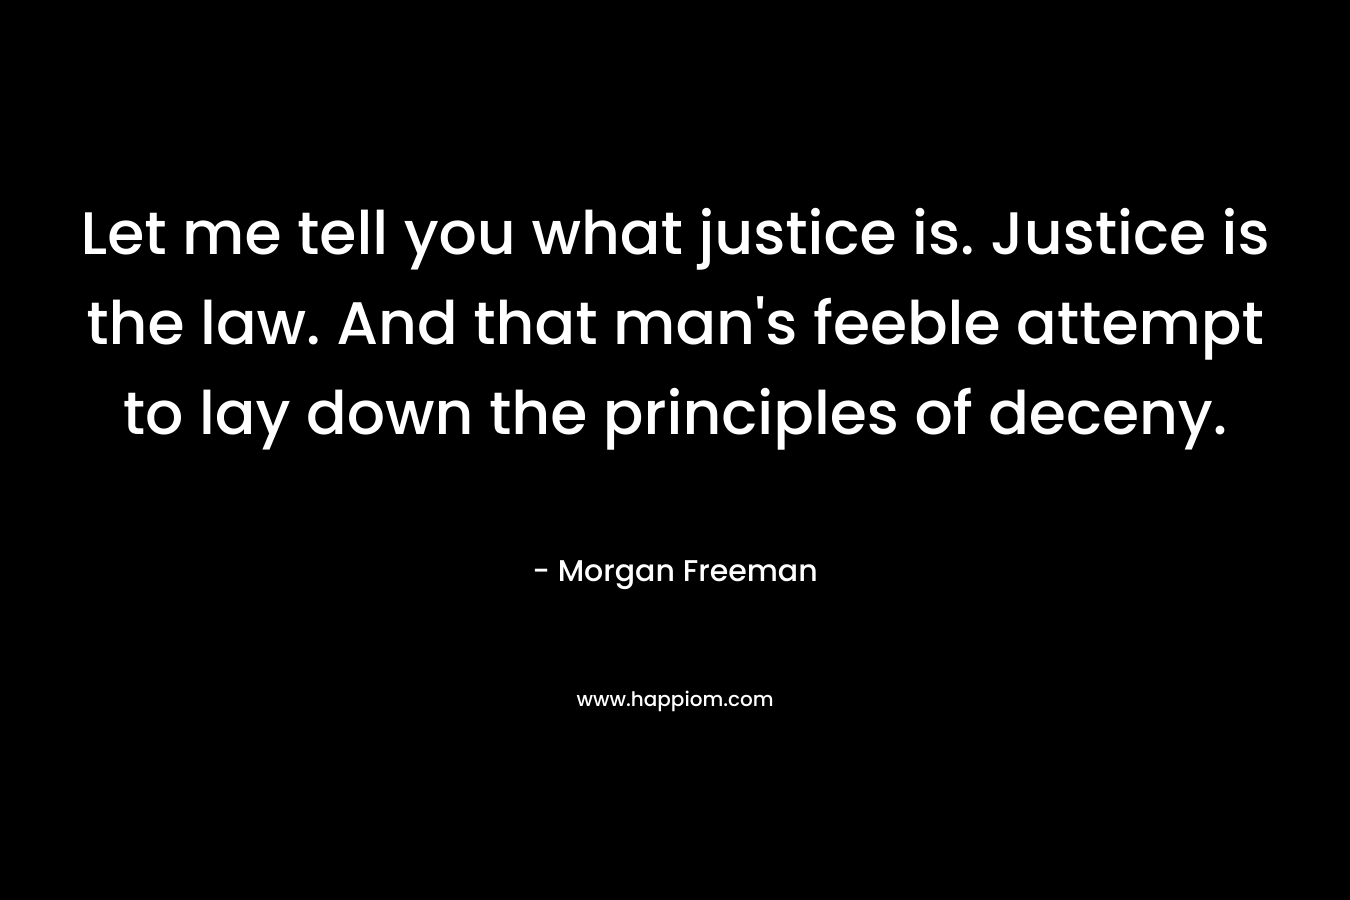 Let me tell you what justice is. Justice is the law. And that man’s feeble attempt to lay down the principles of deceny. – Morgan Freeman